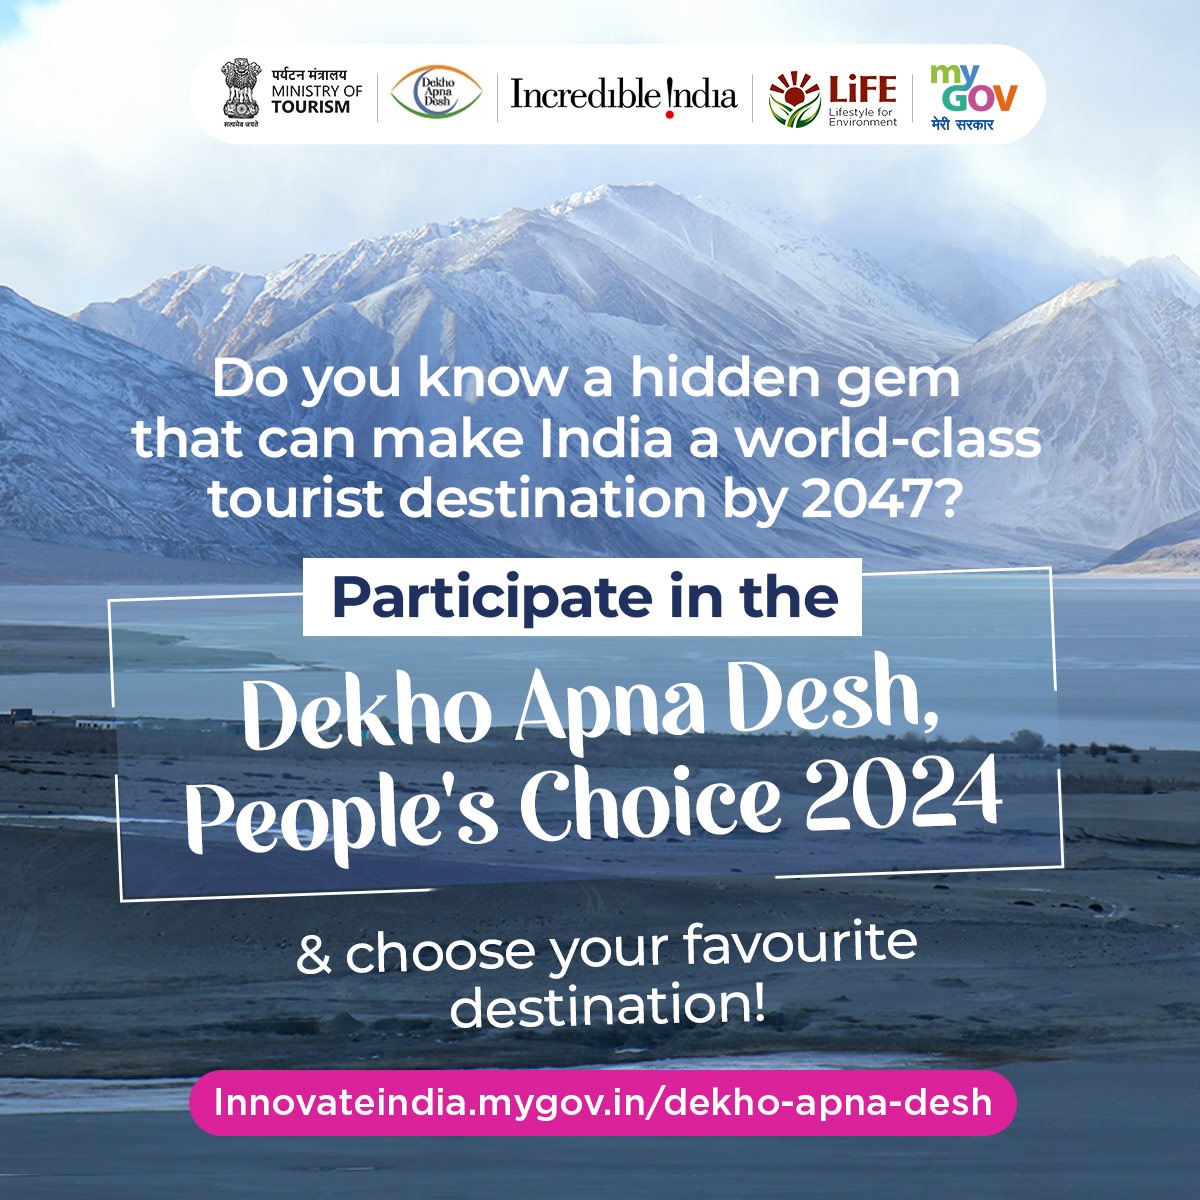 Choose your favourite tourist attractions across various categories as part of Dekho Apna Desh, People’s Choice 2024.

Visit: innovateindia.mygov.in/dekho-apna-des…

#DekhoApnaDesh #IncredibleIndia 
@tourismgoi